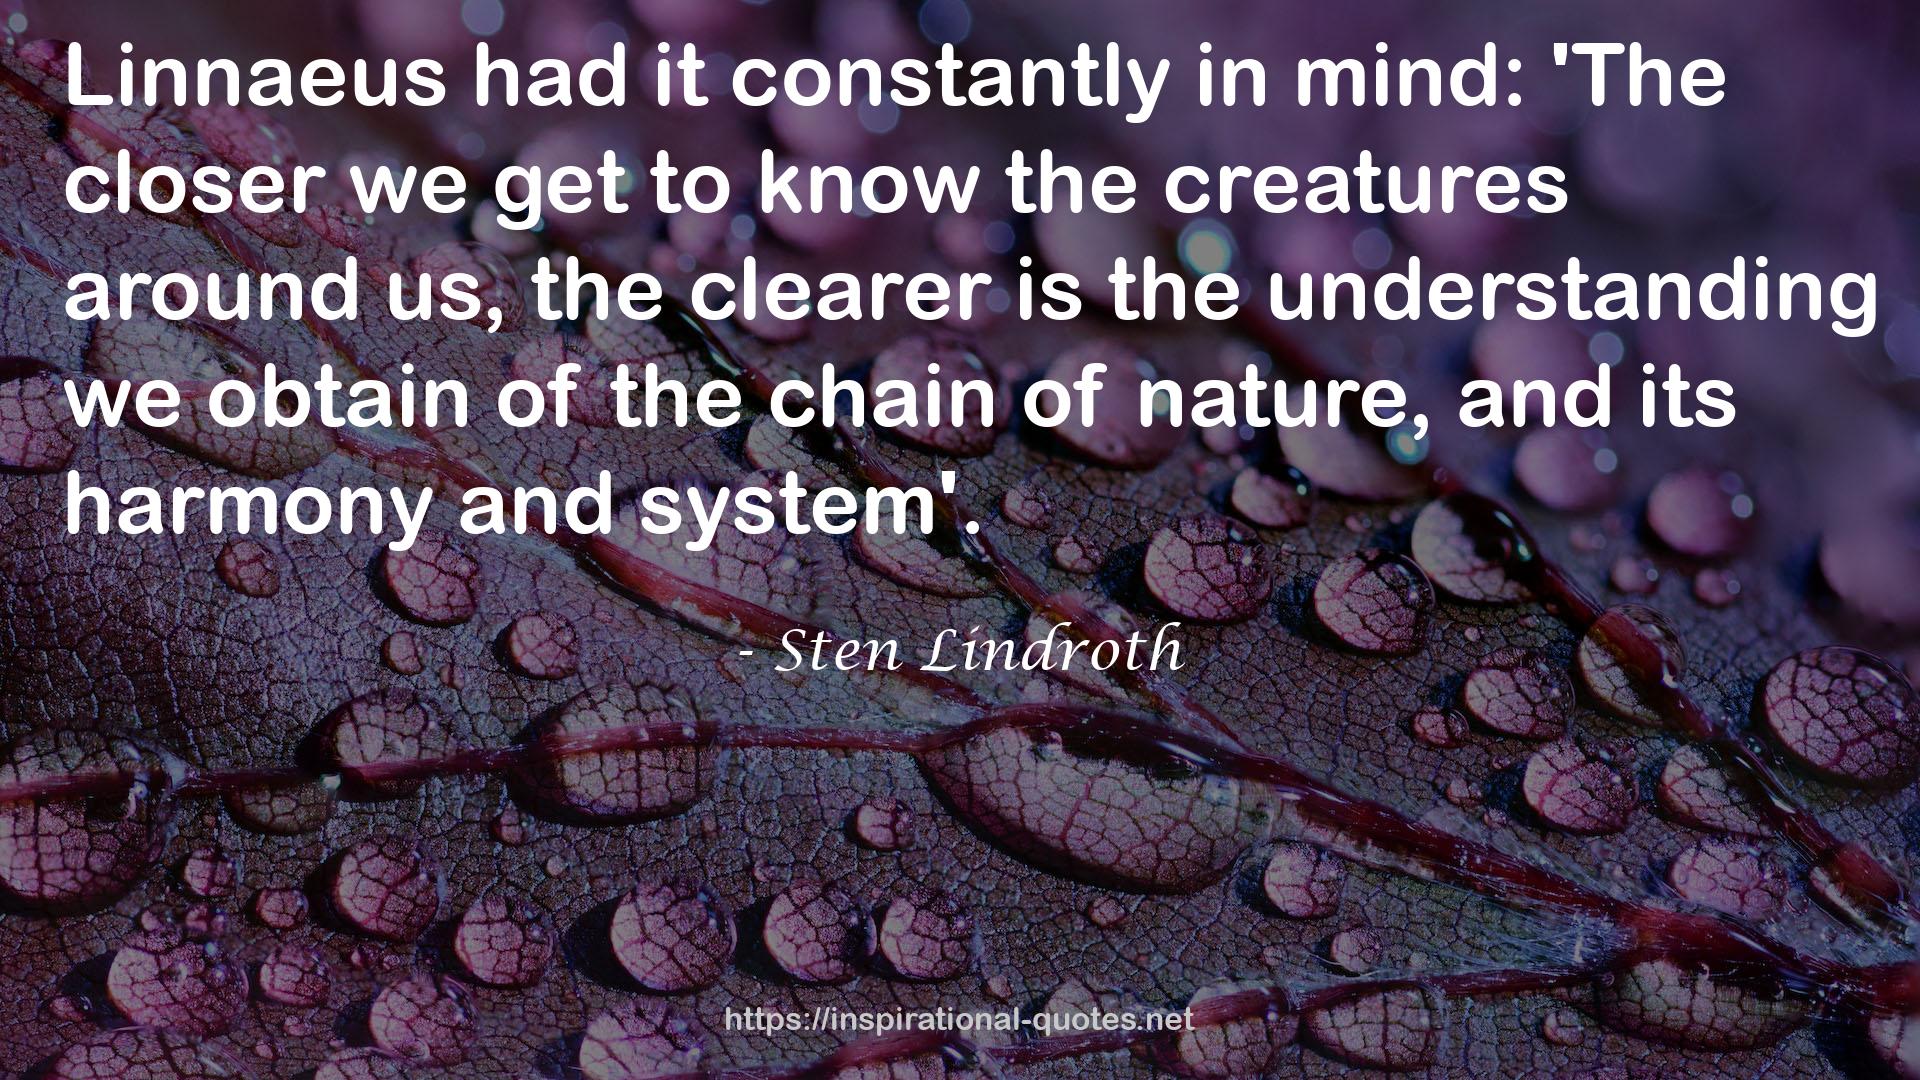 Sten Lindroth QUOTES